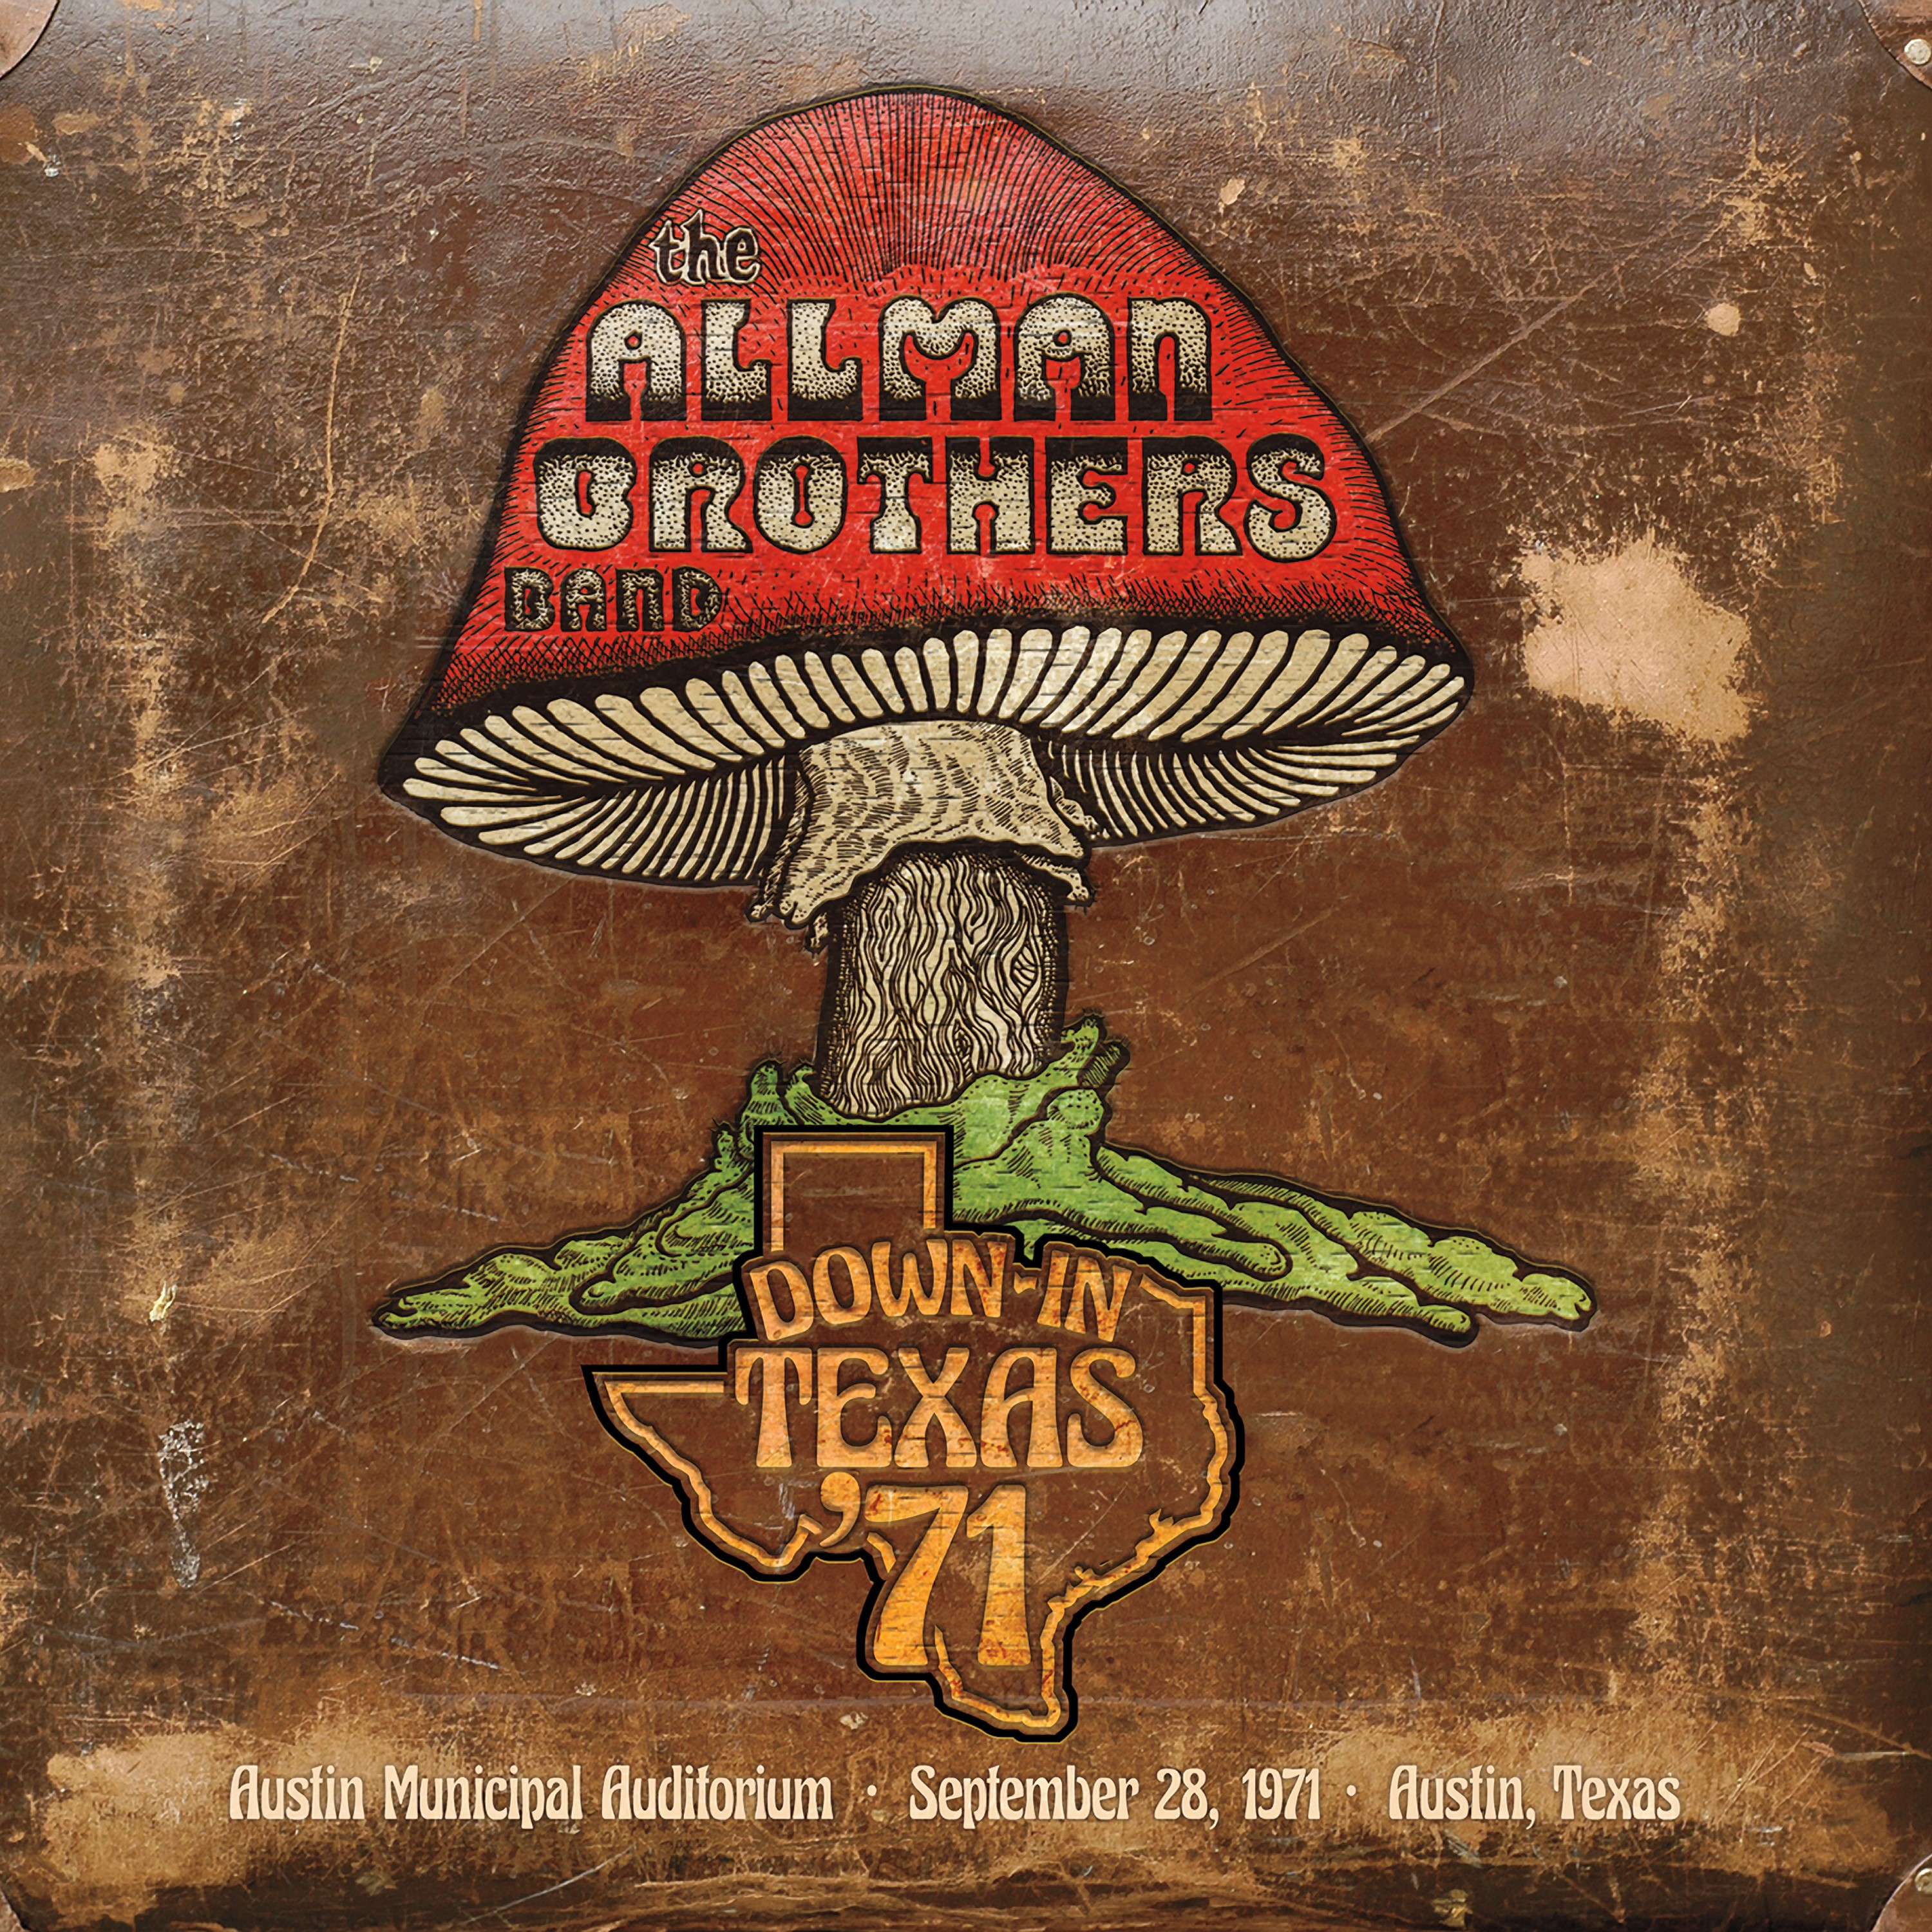 The Allman Brothers Band Releases 'Down In Texas '71'